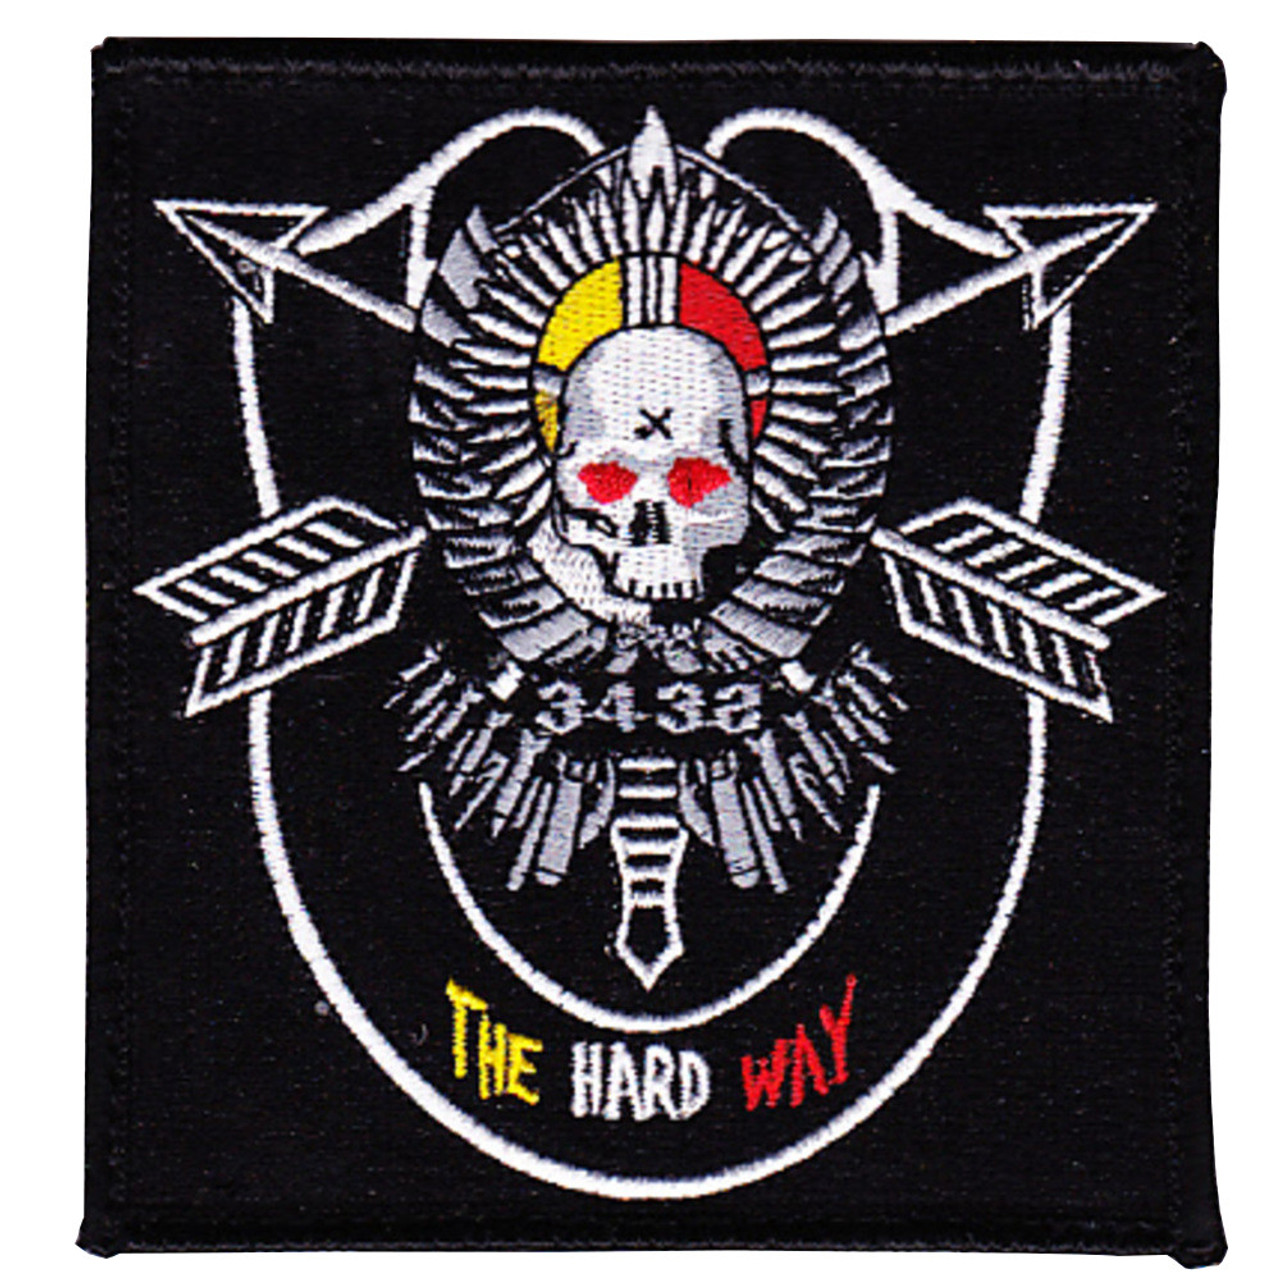 Skull Patch Hook Loop, Liberty Death Patch, Ouch Pouch Patch